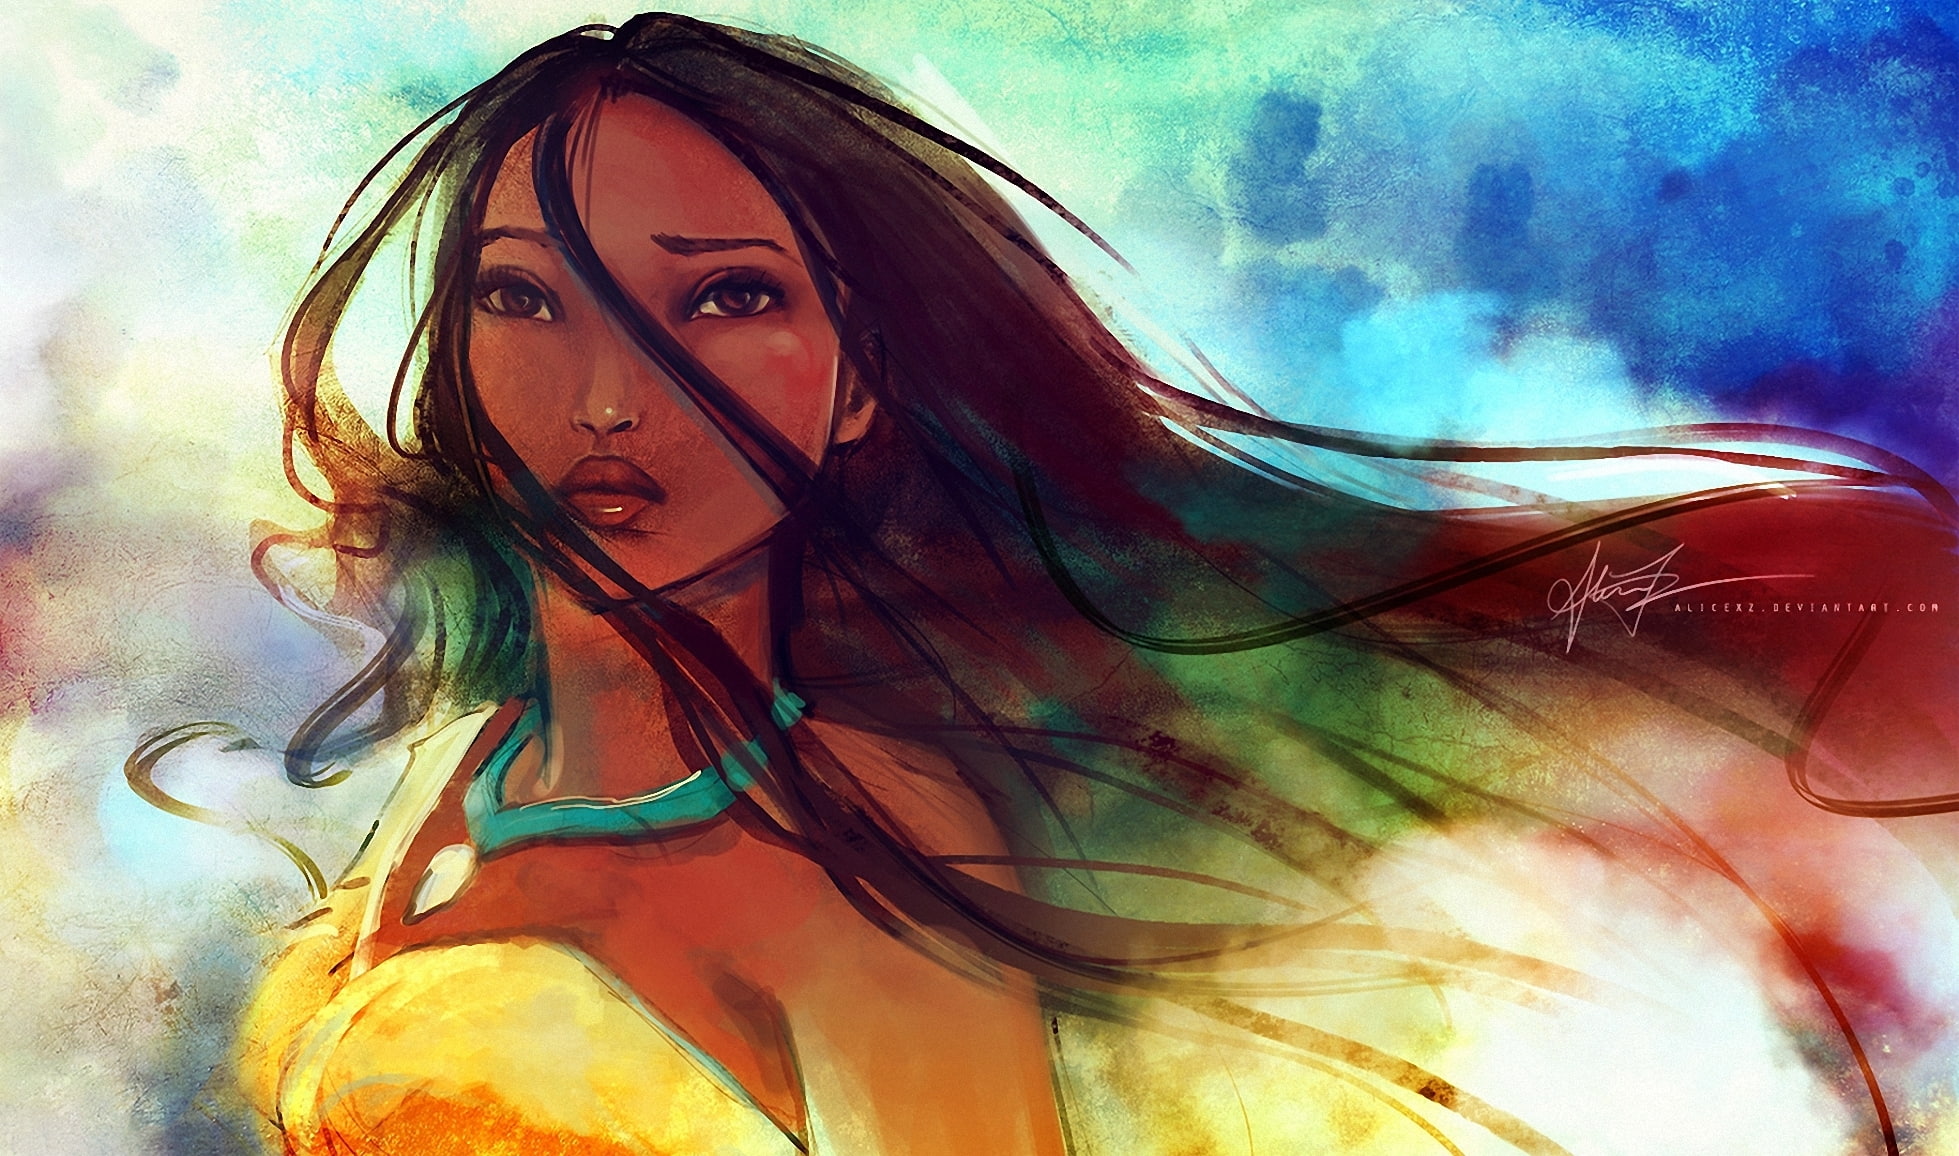 Moana painting, girl, the wind, medallion, pride, strands, Pocahontas. look